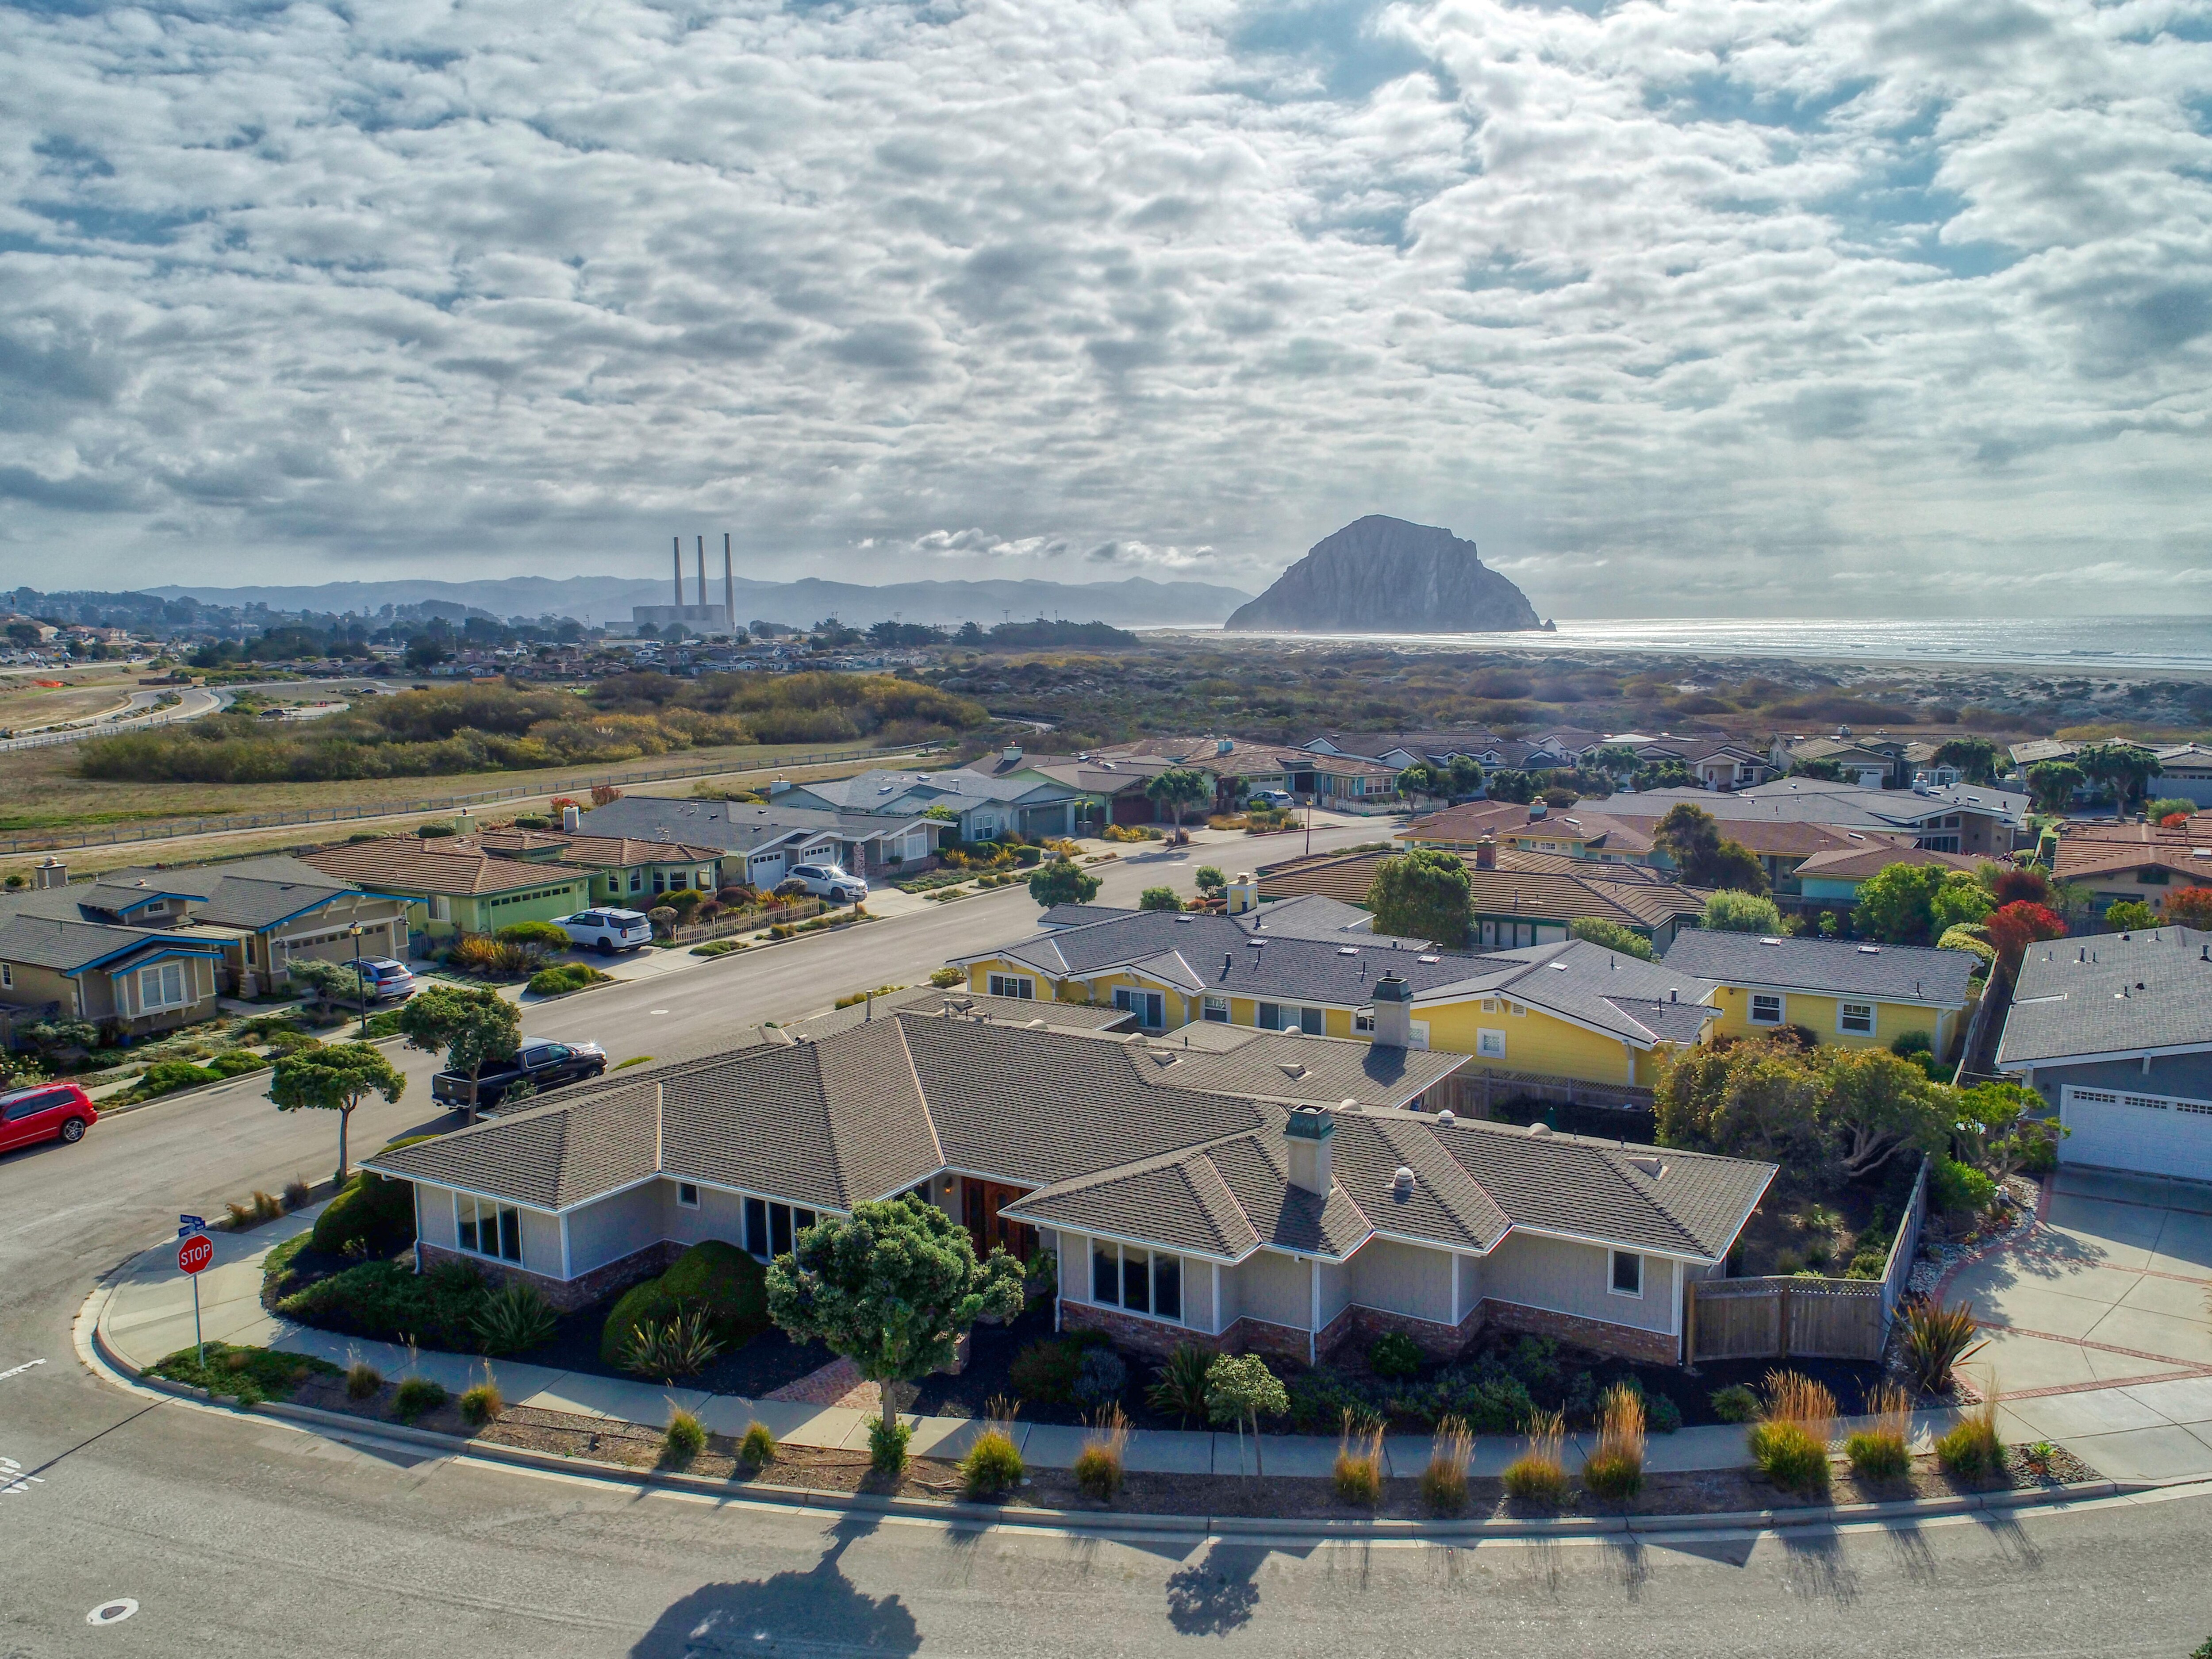 A perimeter of sandy beach and indigo blue ocean engulf this exclusive Morro Bay estate vacation home.